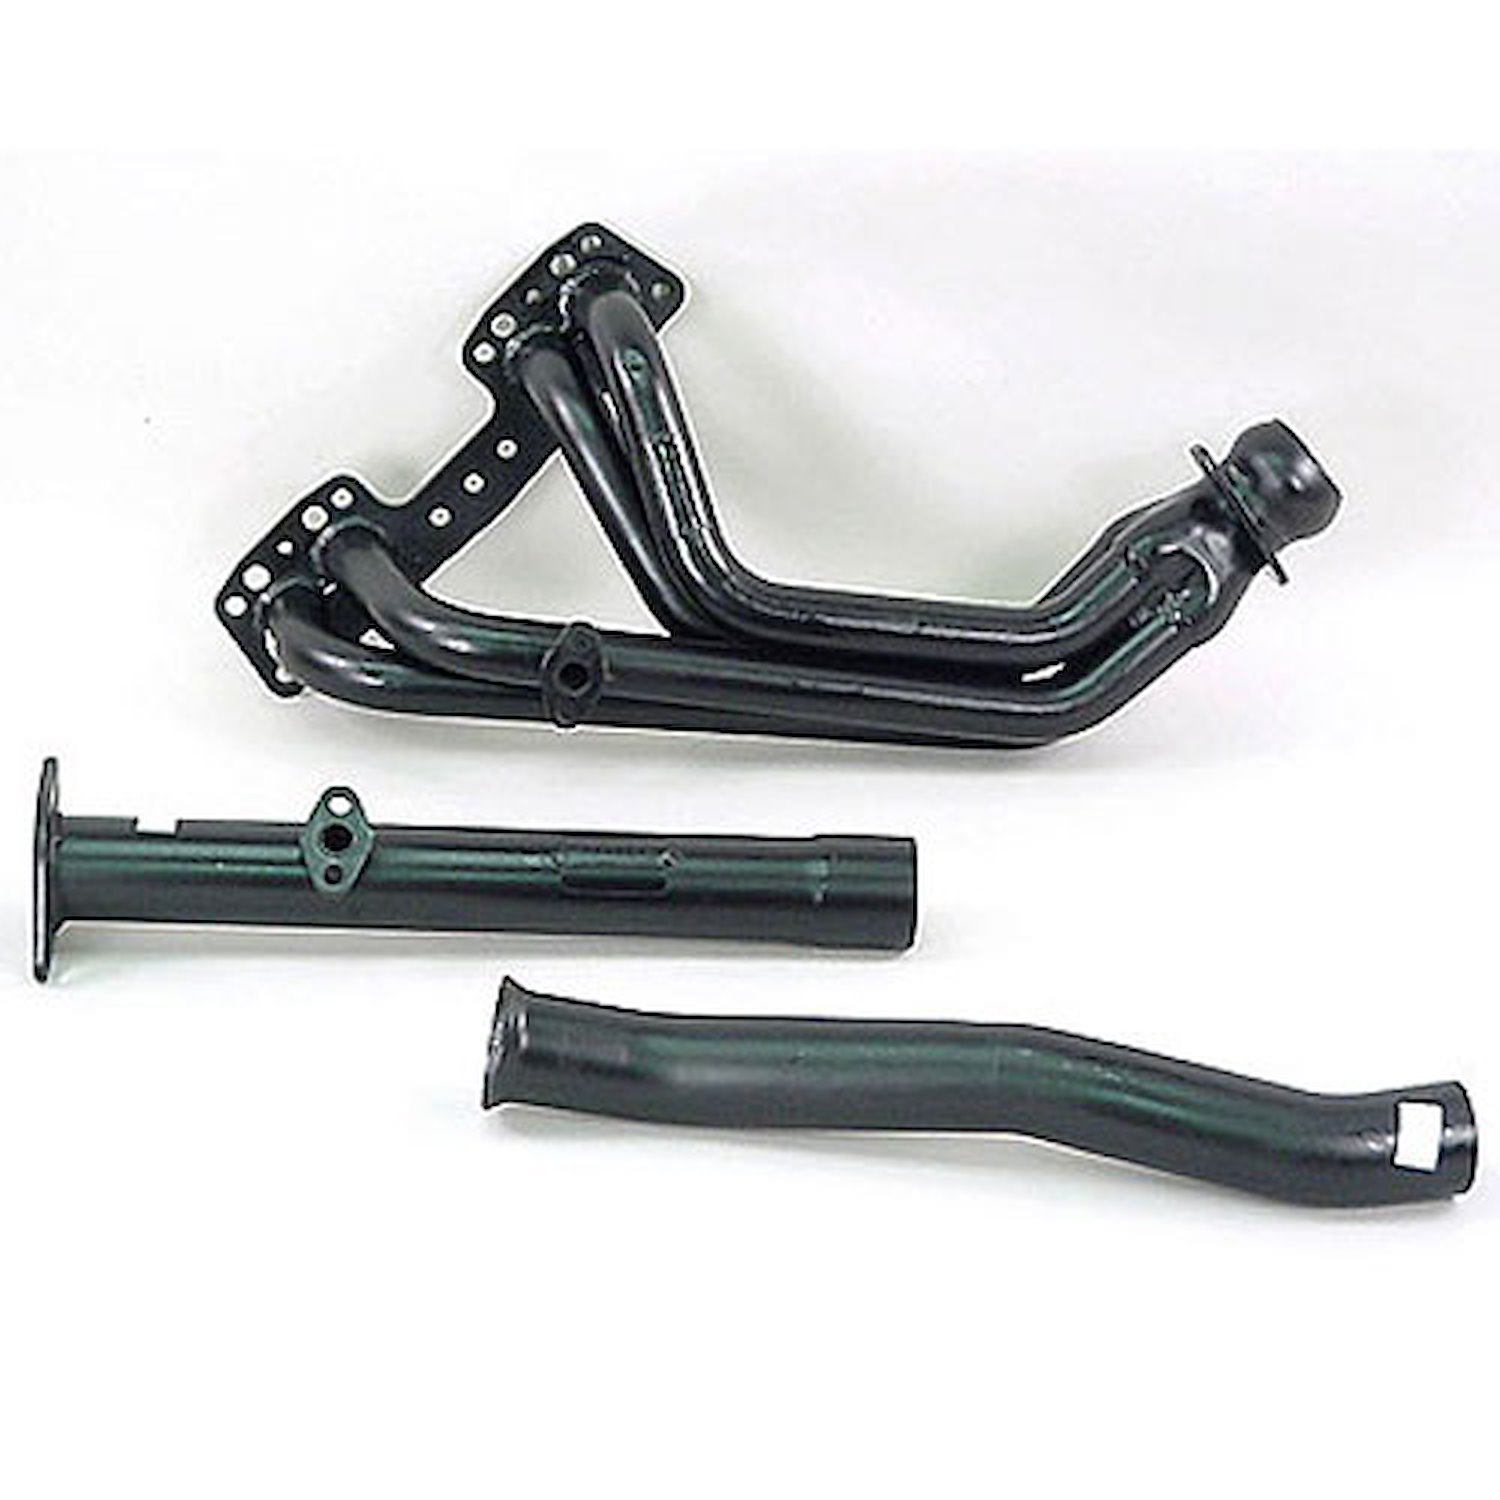 Painted Truck Header 1990-95 Tacoma Pickup/4Runner 2WD 22R/RE